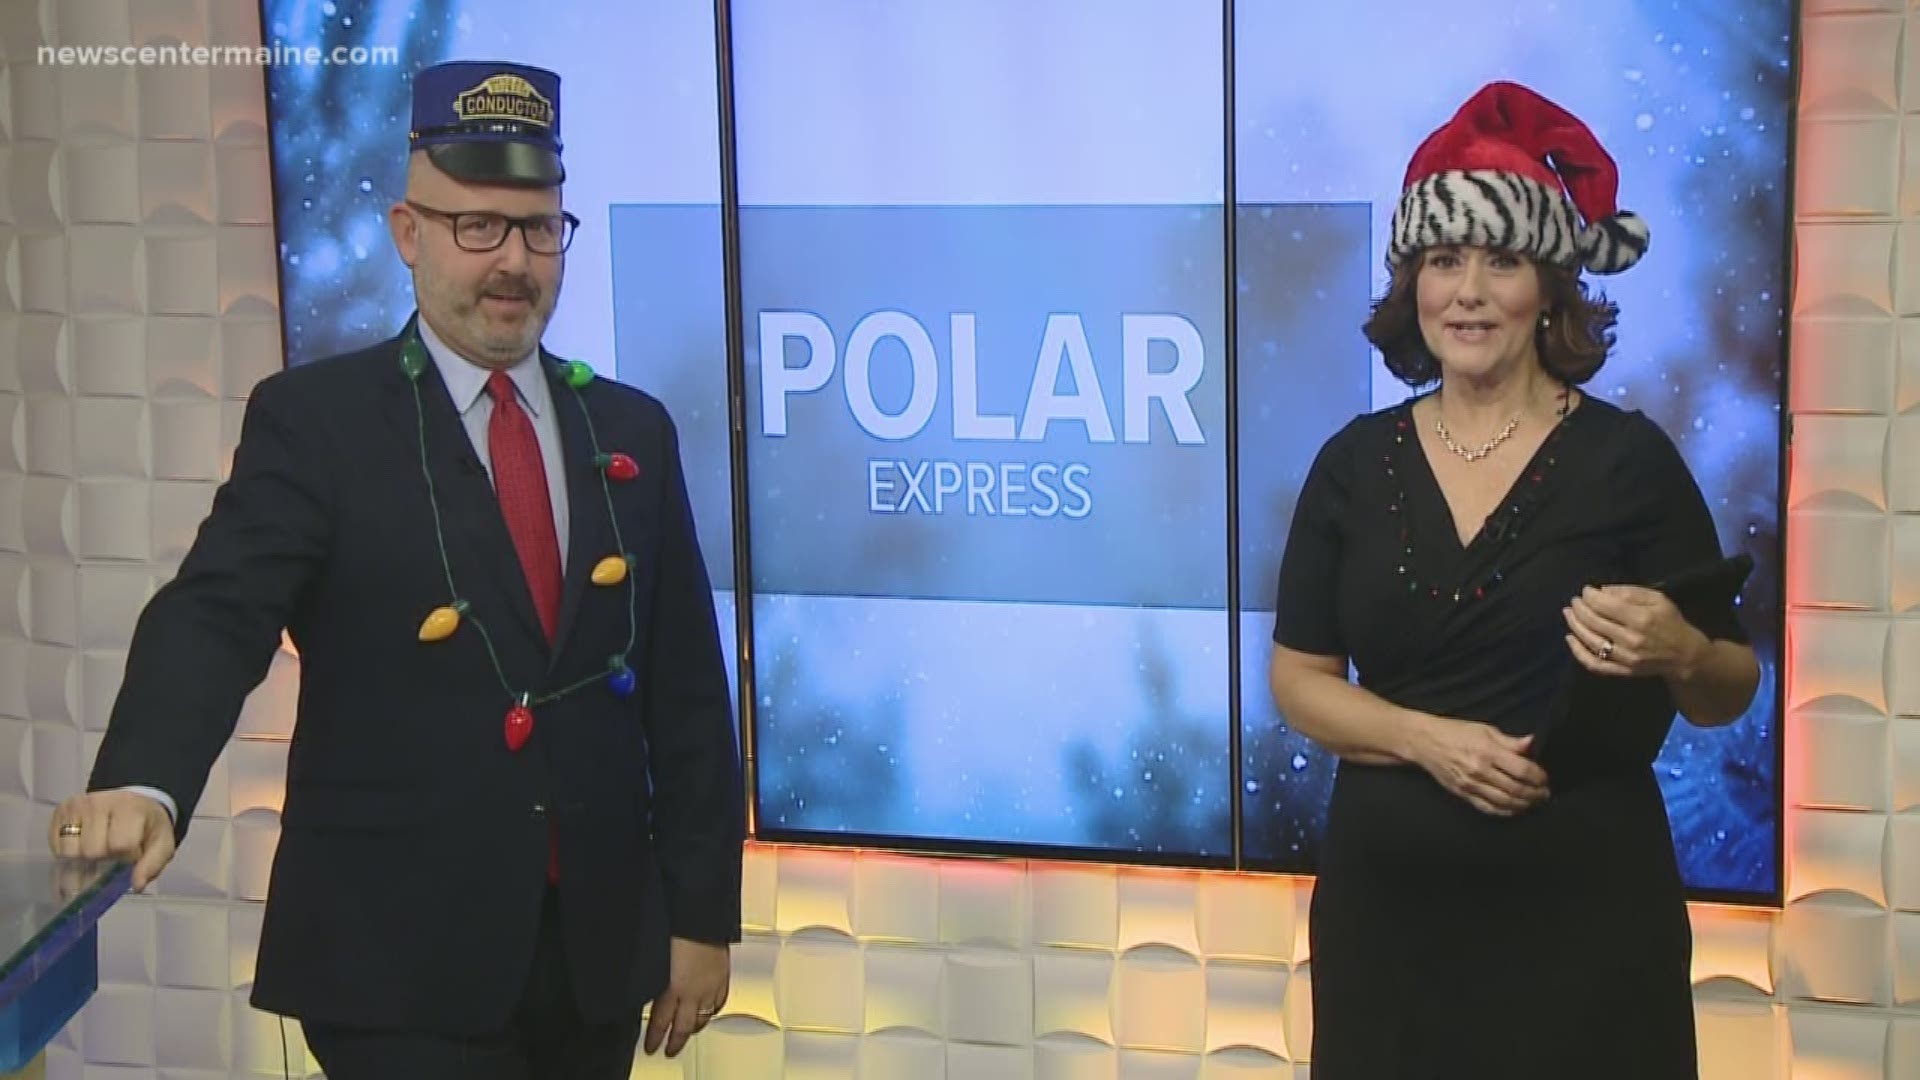 All aboard the Polar Express! Zach Blanchard visits the "North Pole" with a little help from the Maine Narrow Gauge Railroad Company and Museum.